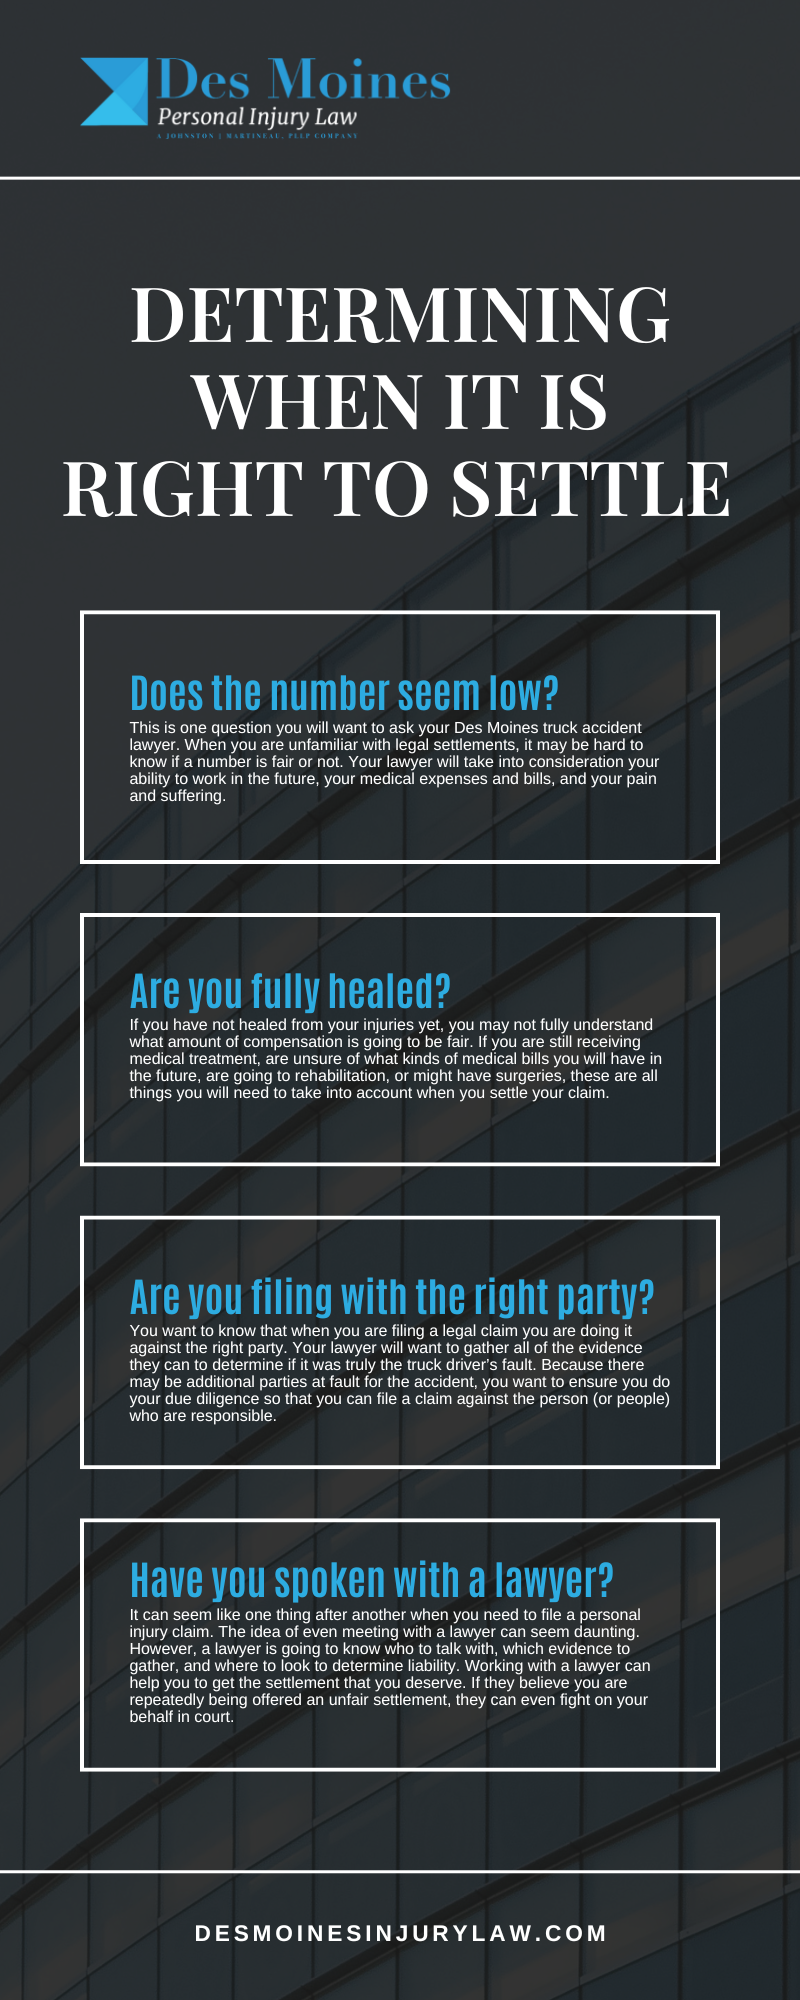 Determining When It Is Right To Seattle Infographic